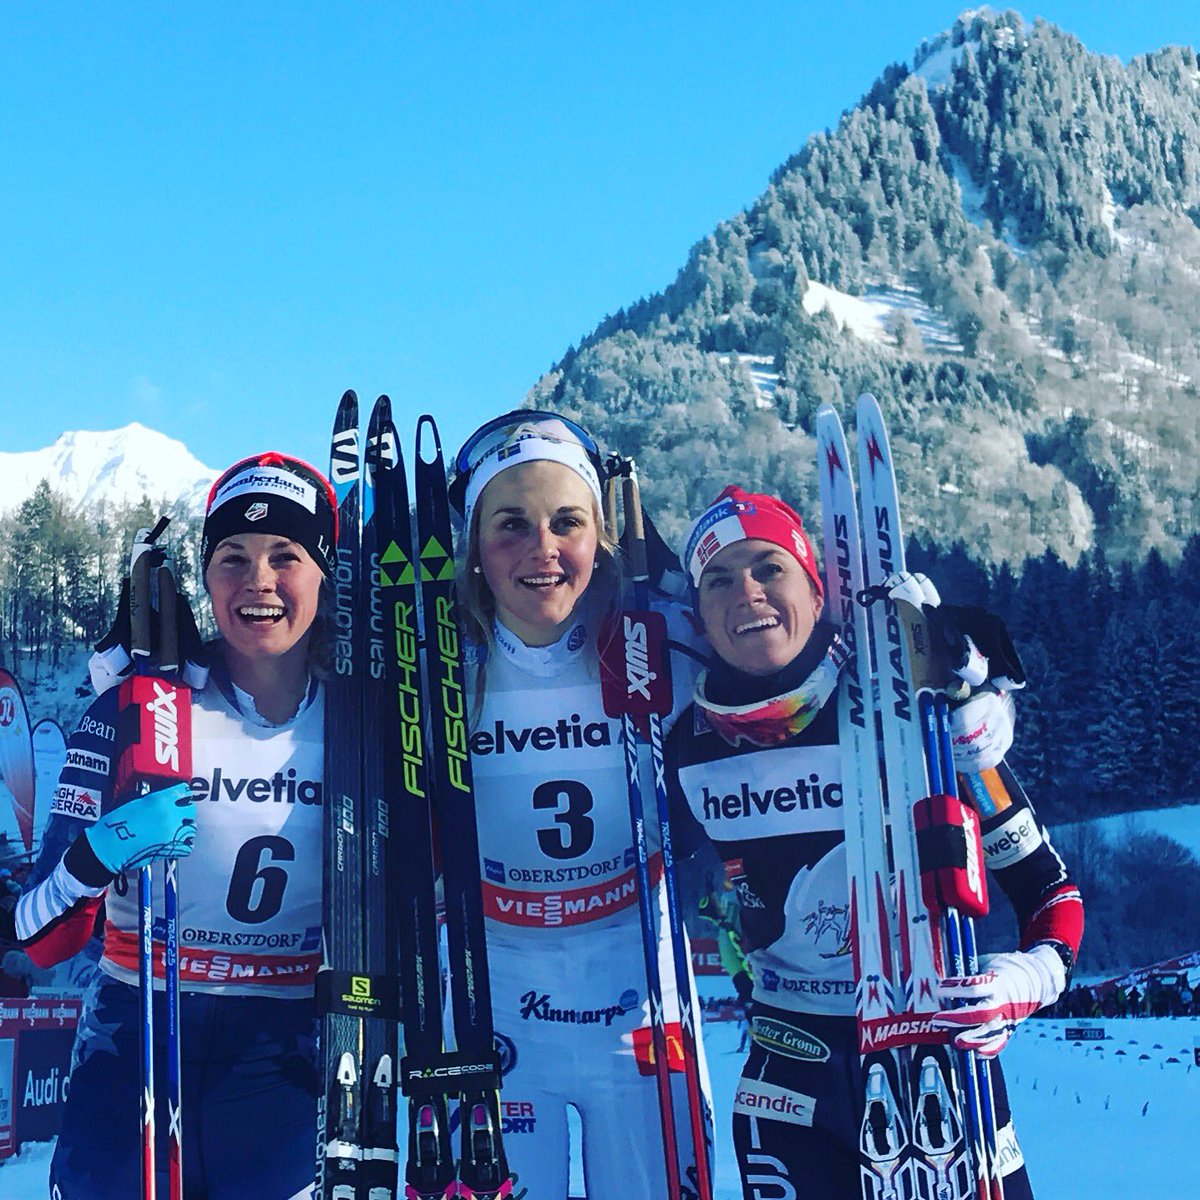 The women's 10 k skiathlon podium on Tuesday at Stage 3 of the Tour de Ski in Oberstdorf, Germany, with Sweden's Stina Nilsson (c) winning her first World Cup distance race, American Jessie Diggins (l) notching a career-best skiathlon result in second, and Norway's Heidi Weng (r) placing third. (Photo: FIS Cross Country/ witter)